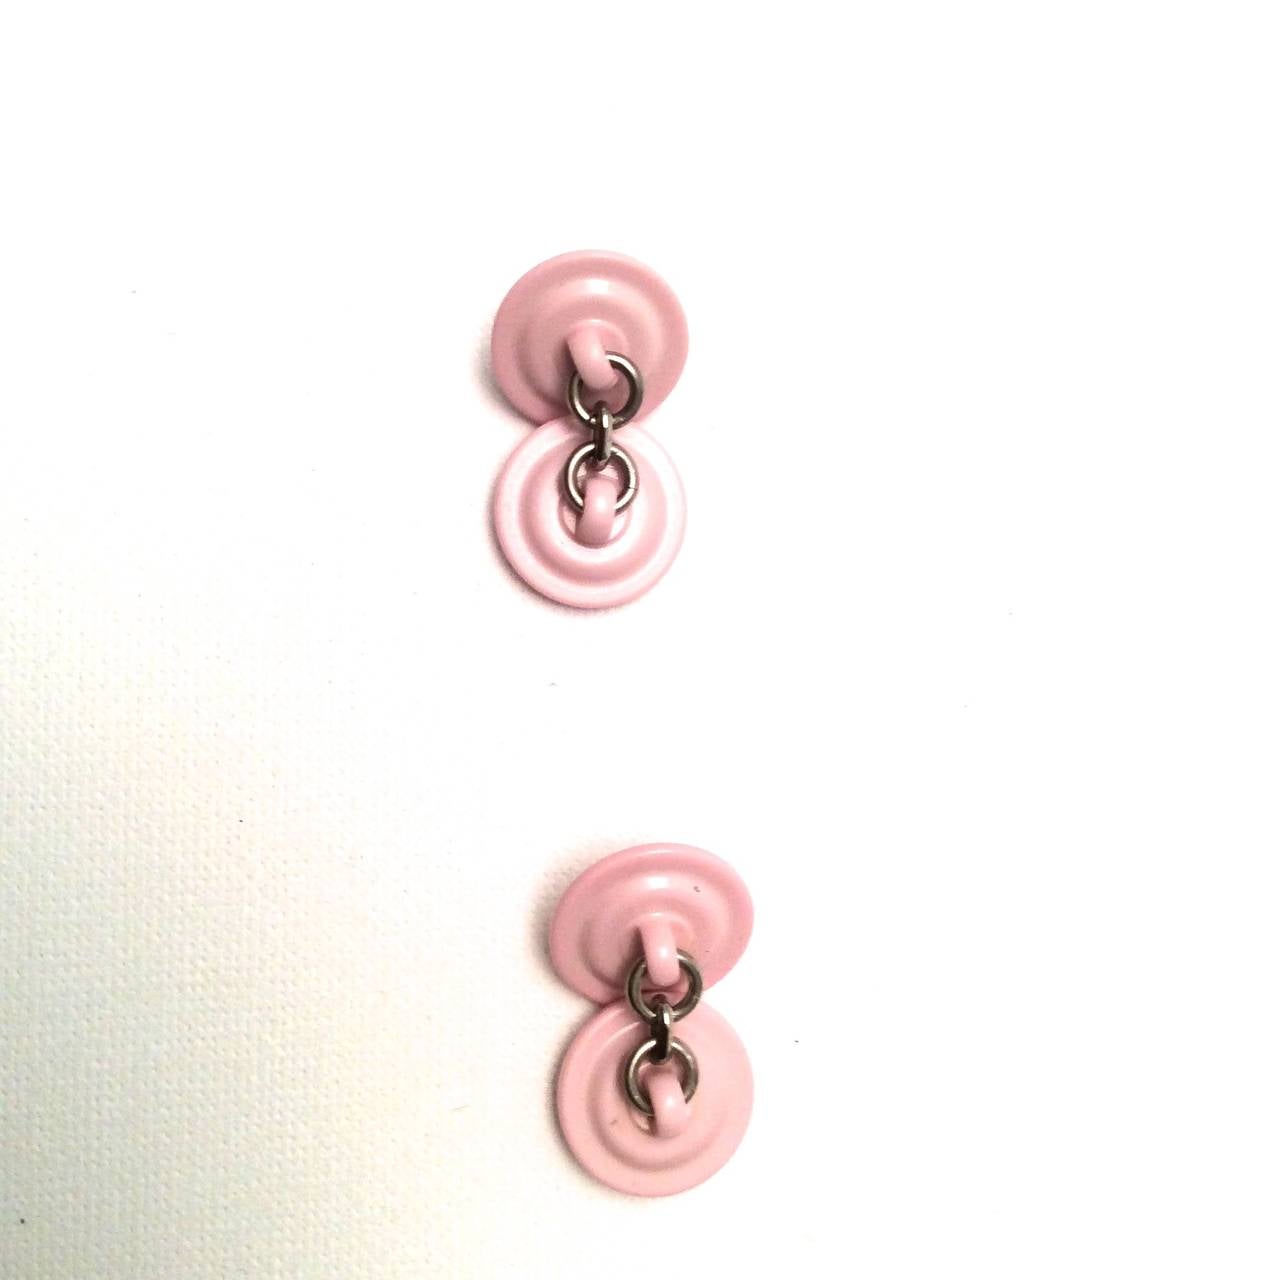 A pair of pink and white Chanel cufflinks from the 1980's. Each circular button on each end of the cufflinks is .6 inches. There is a chain that holds each half together. The cufflinks are a light pink with a cream white CC logo. A great addition to